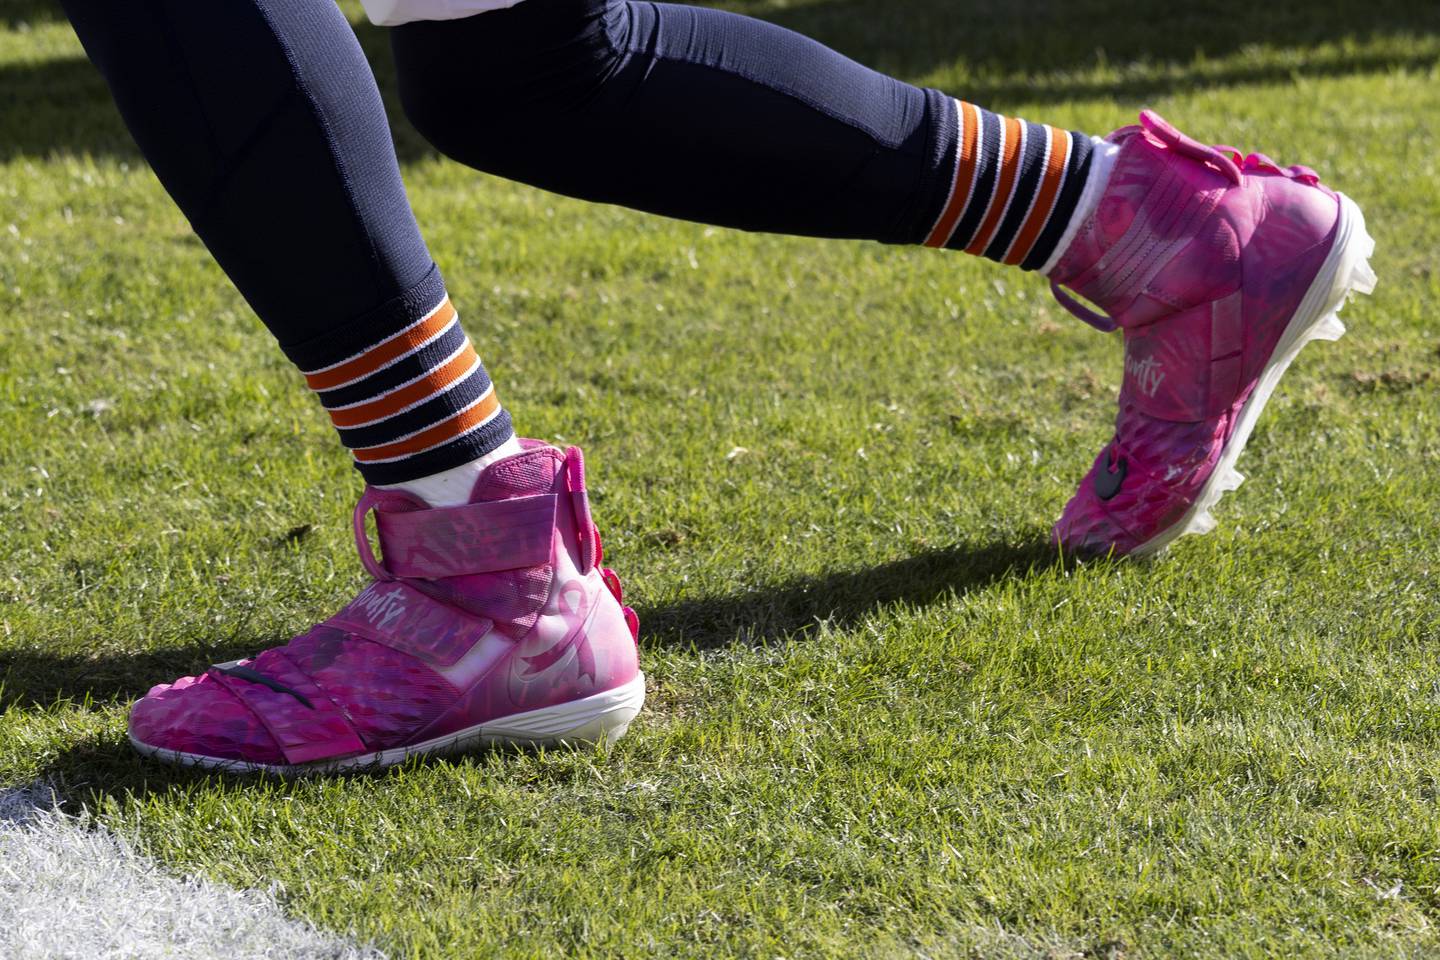 Bears linebacker Trevis Gipson wears Bears Care pink cleats as part of the NFL’s My Cause My Cleats for the Week 13 game on Dec. 4, 2022.